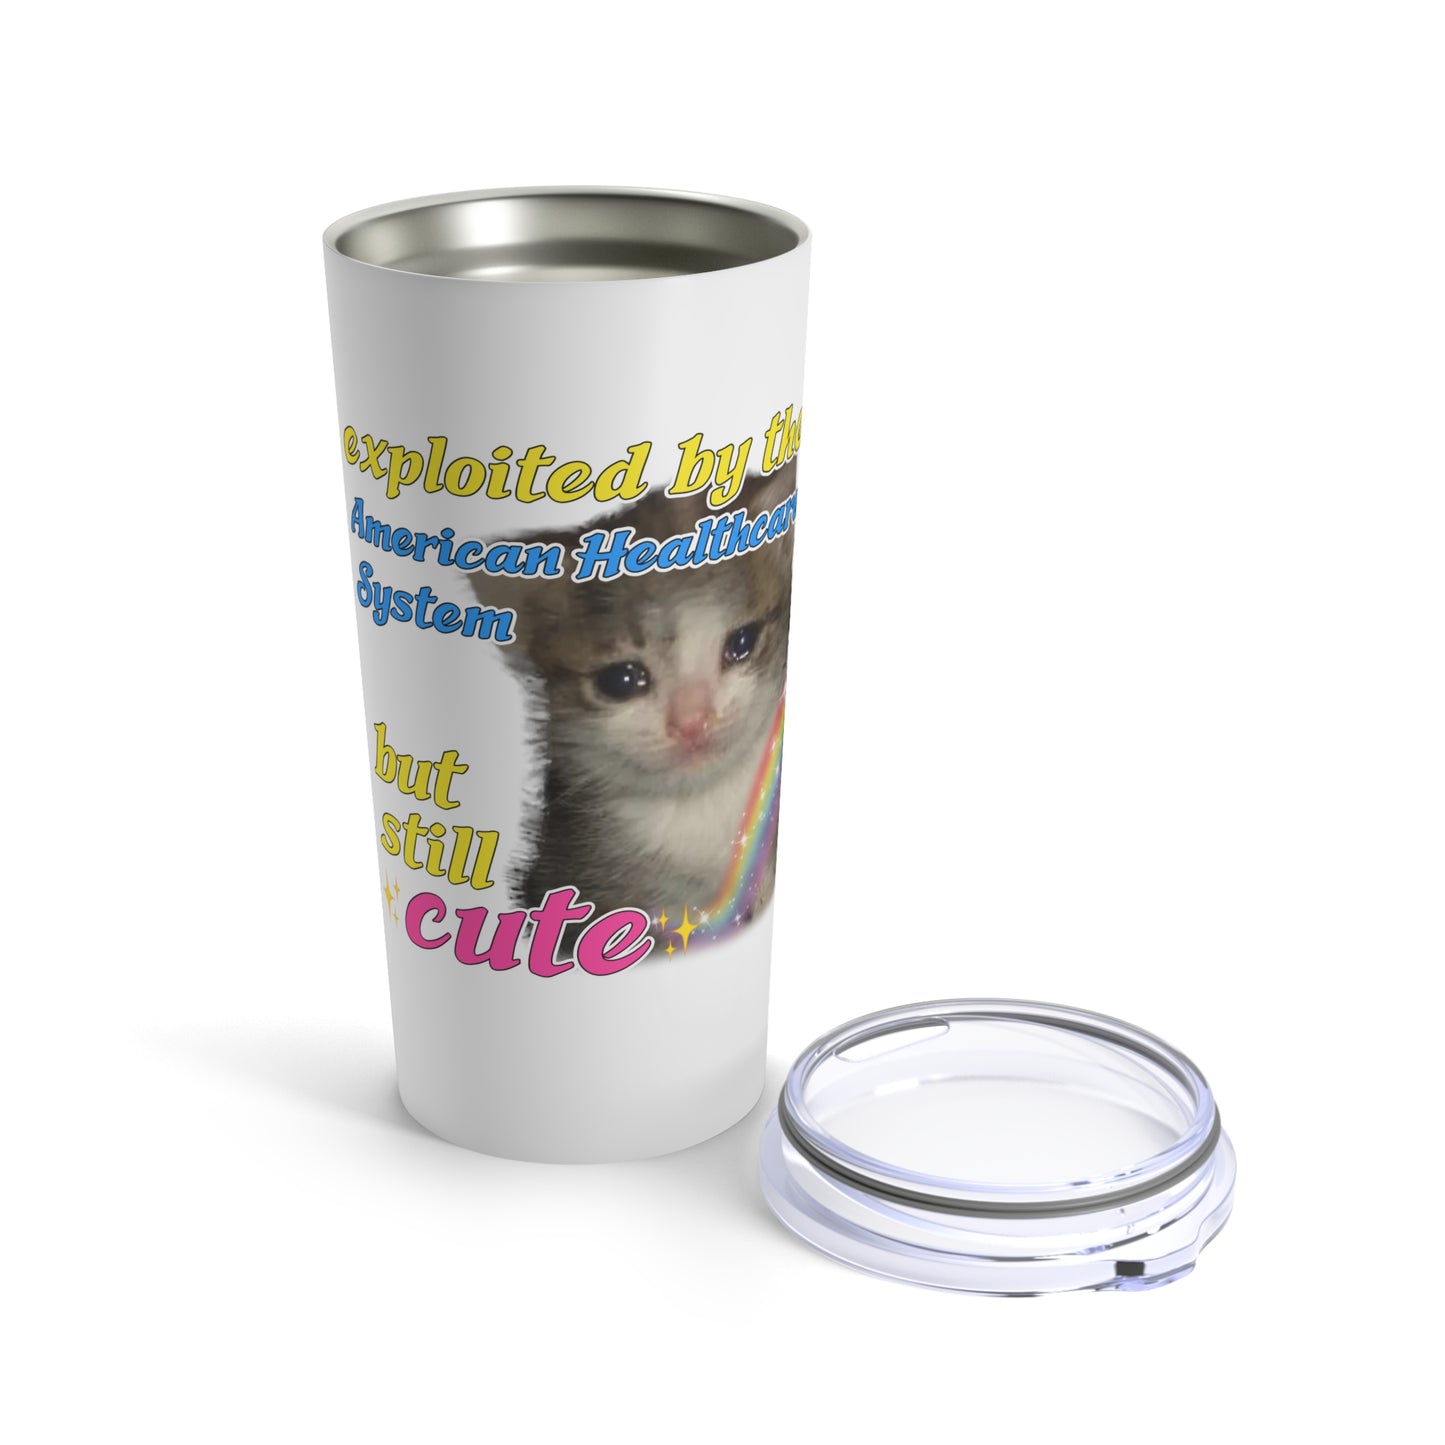 Exploited By The American Healthcare System Cat Tumbler